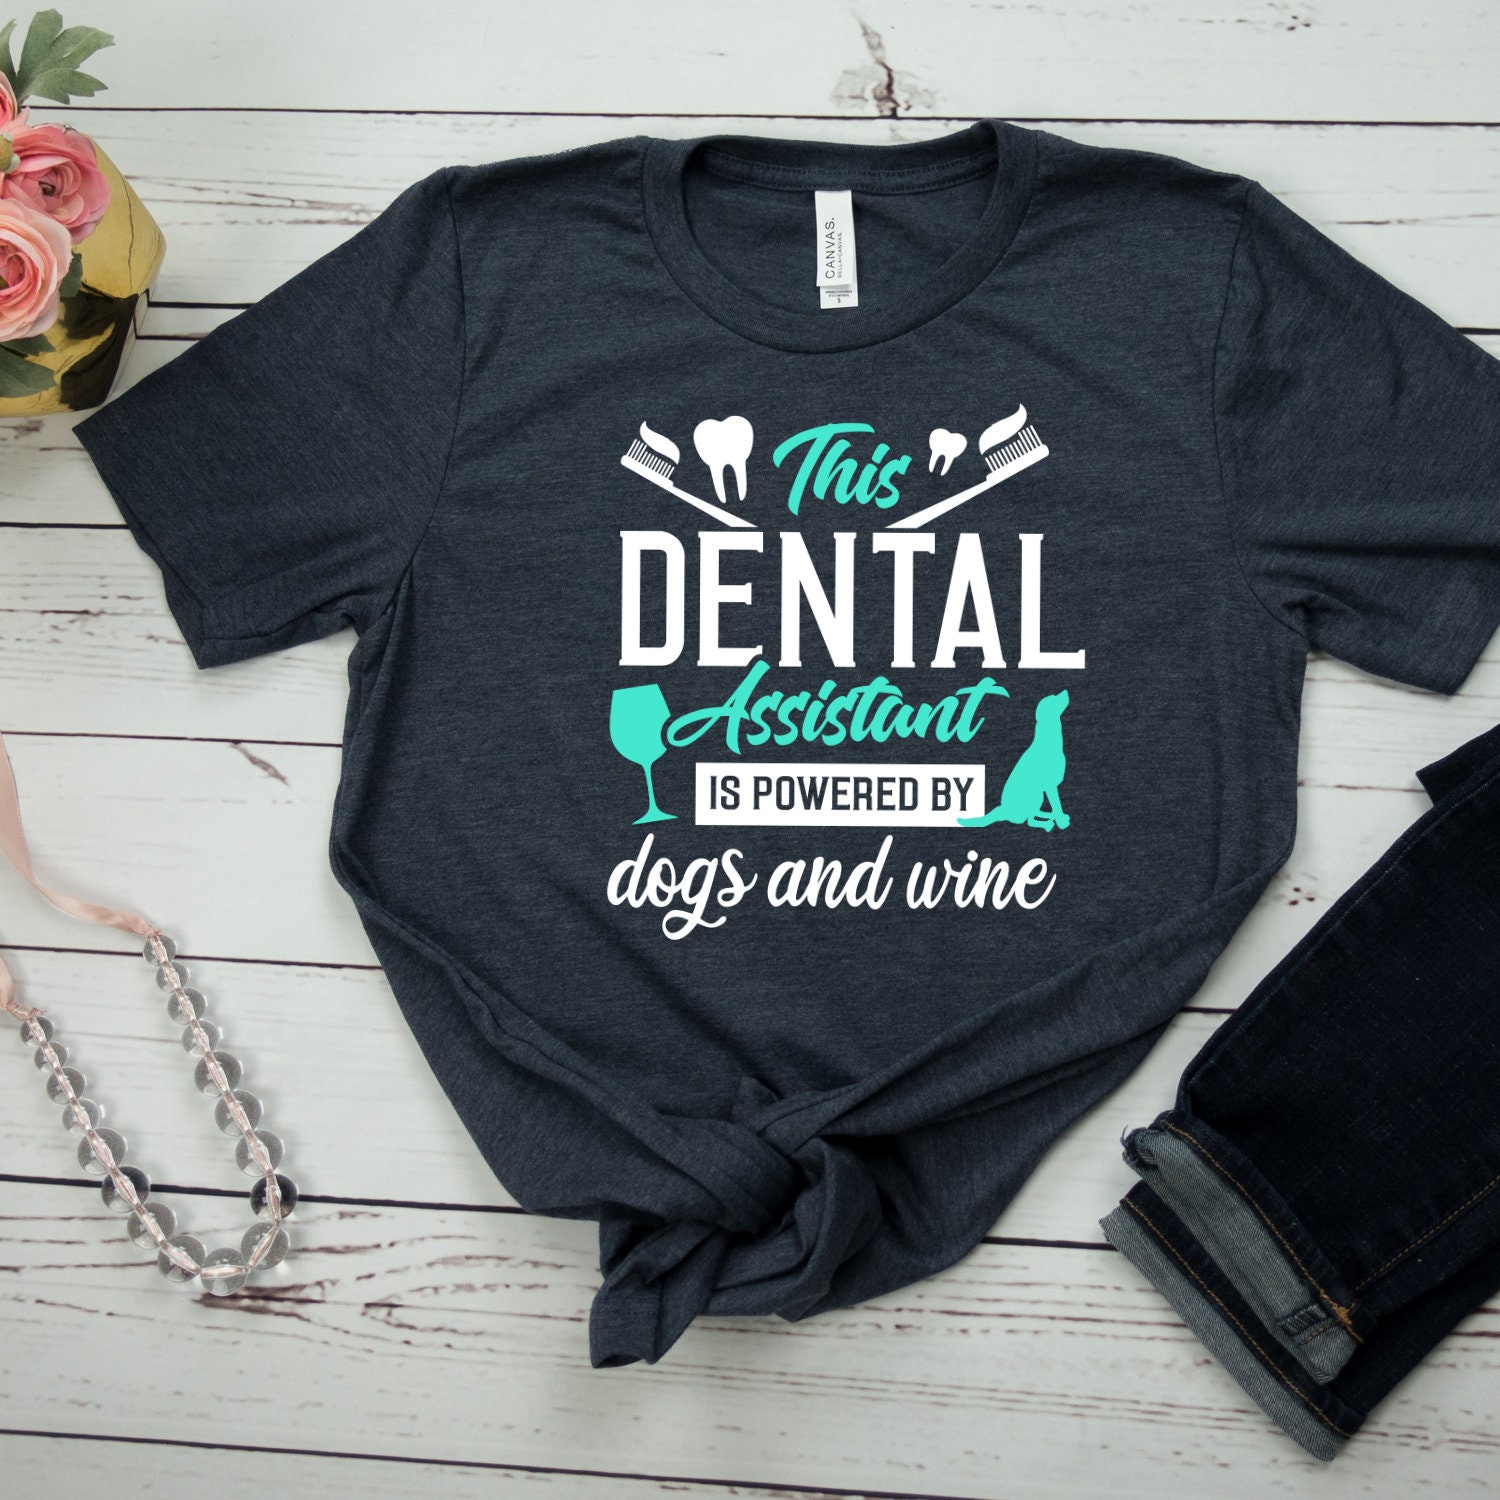 Dental Assistant Shirt Funny Dental Assistant Wine and Dogs